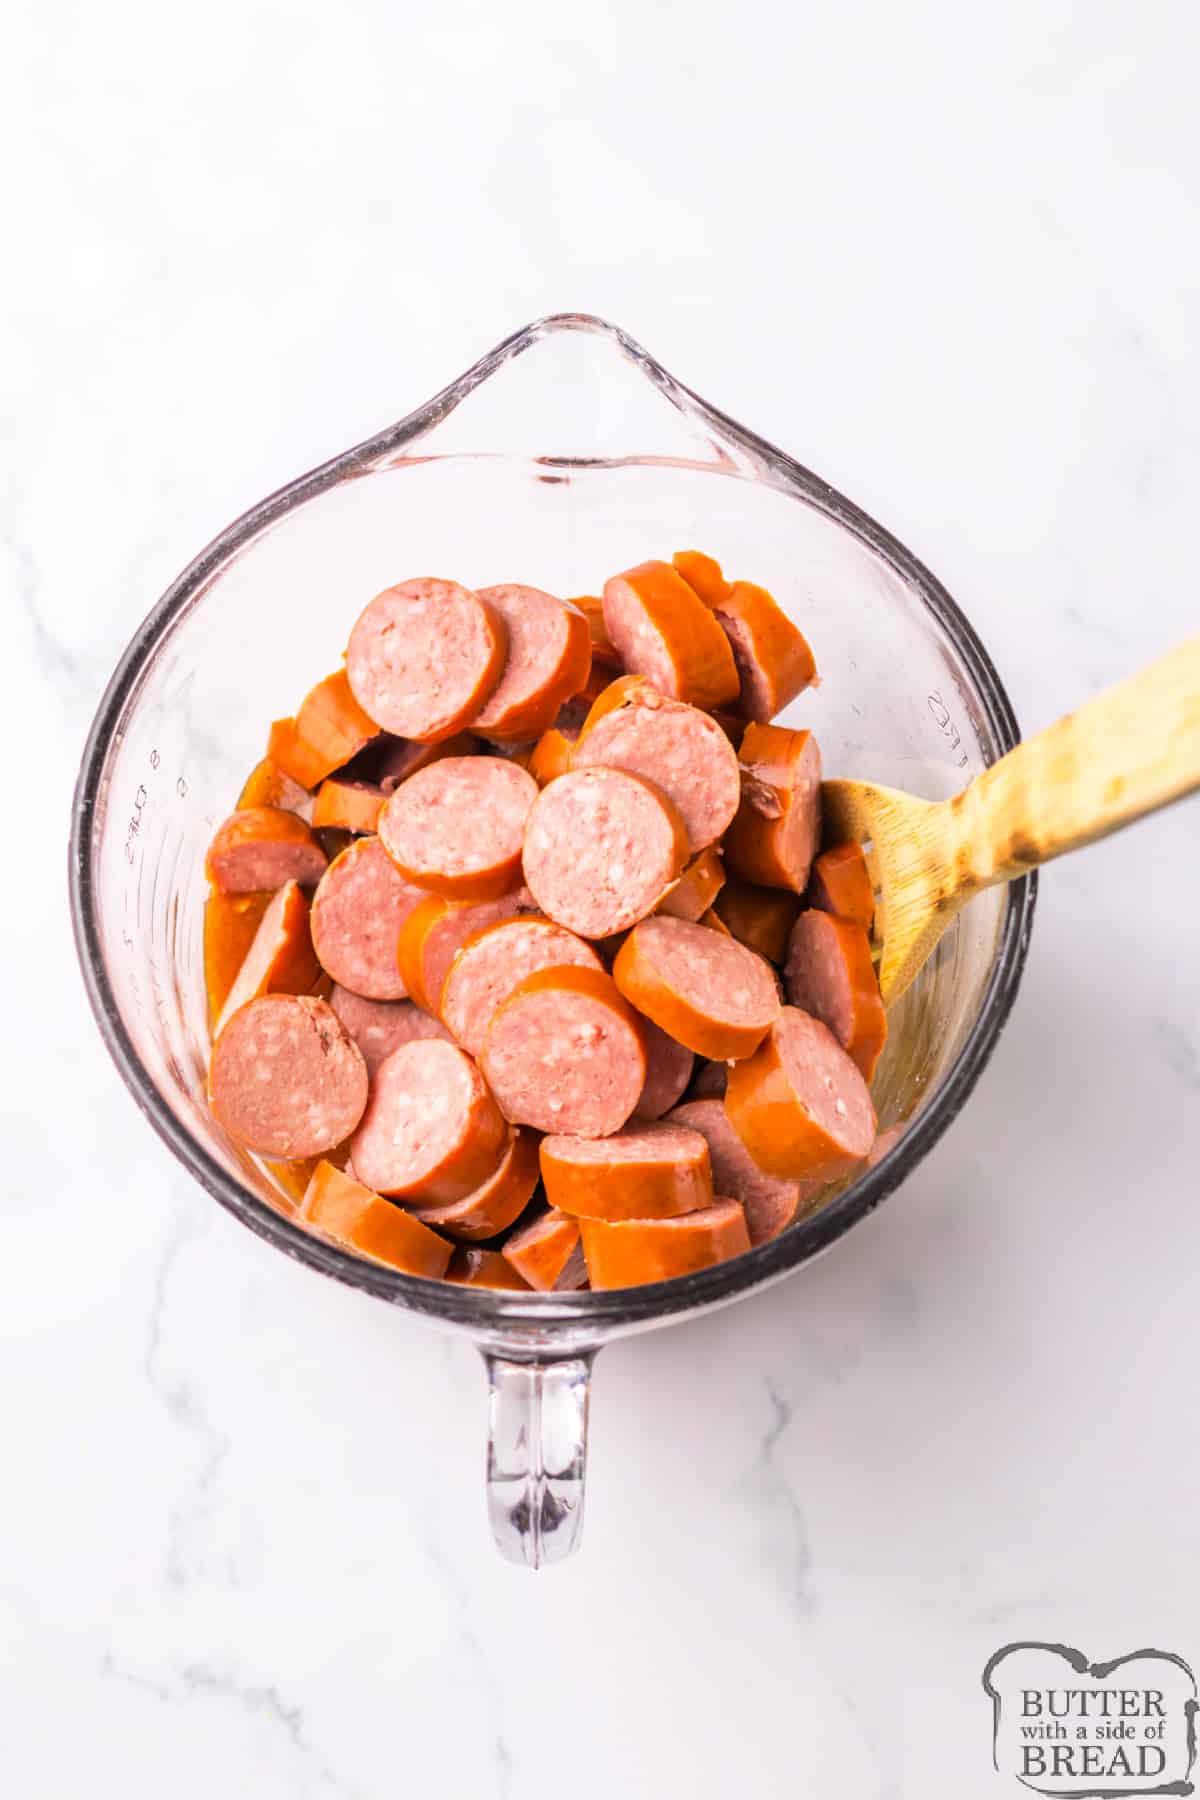 Mixing sliced sausage in the glaze. 